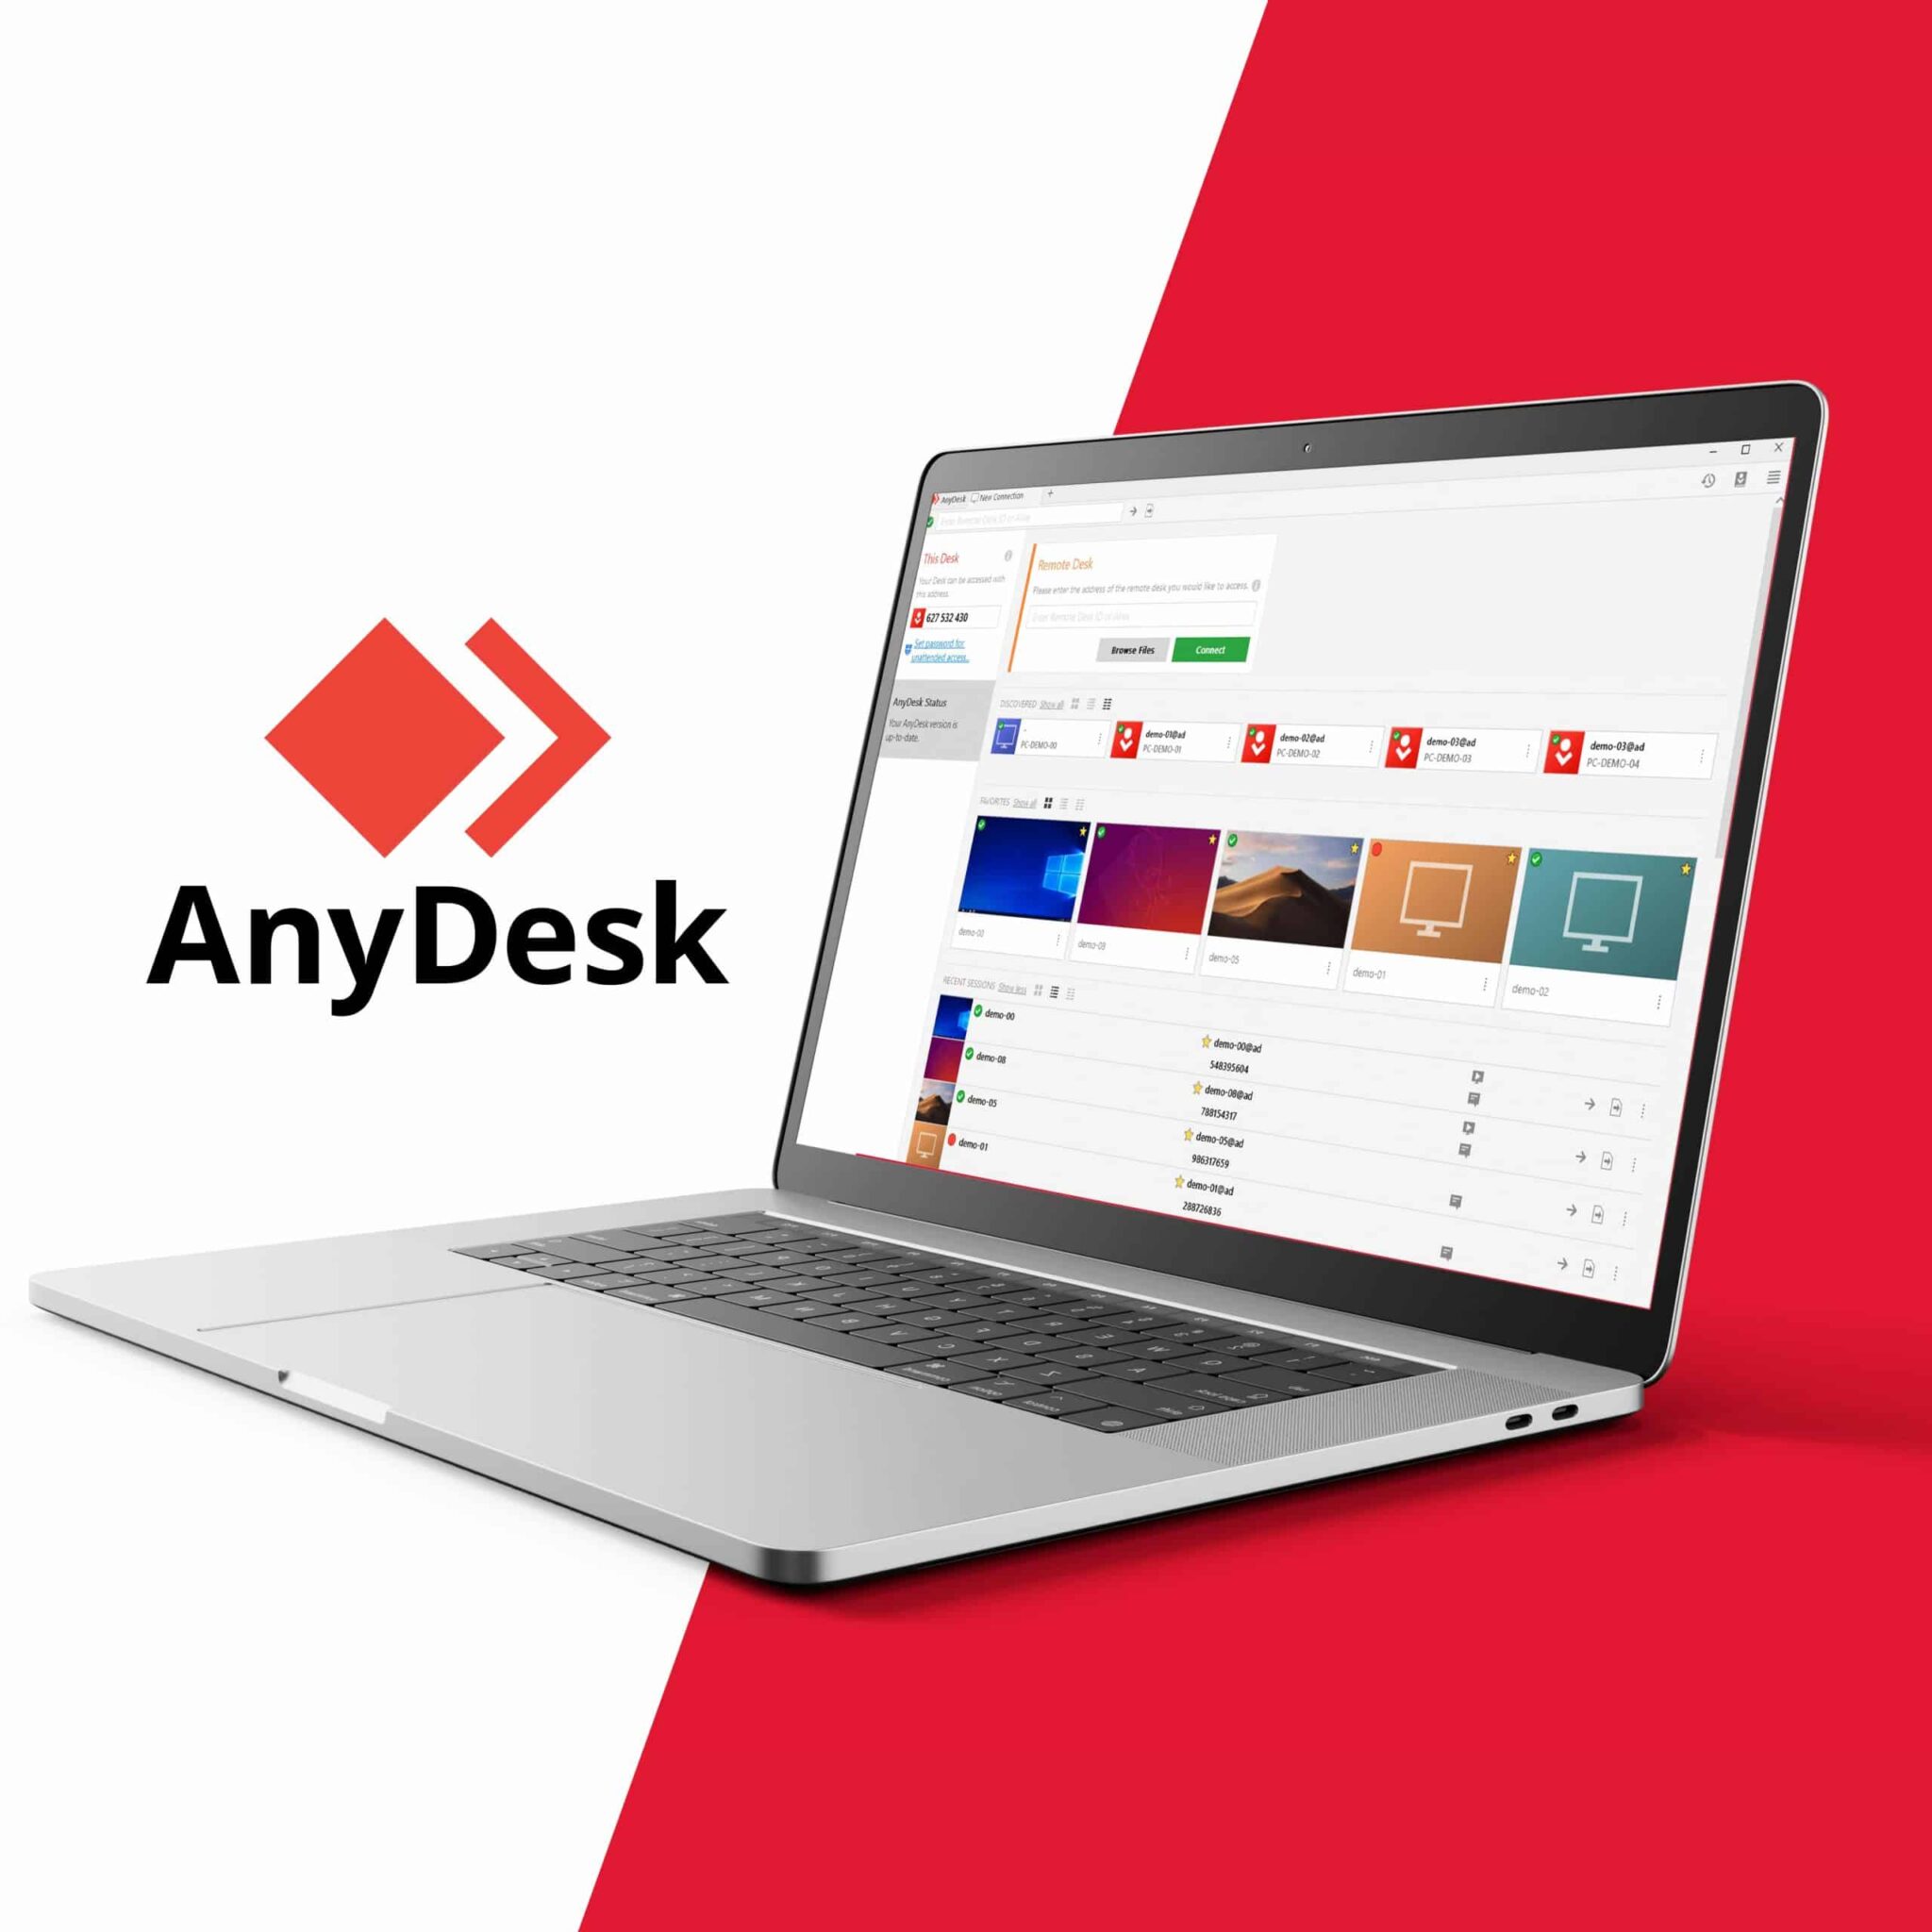 anydesk remote control app download for laptop